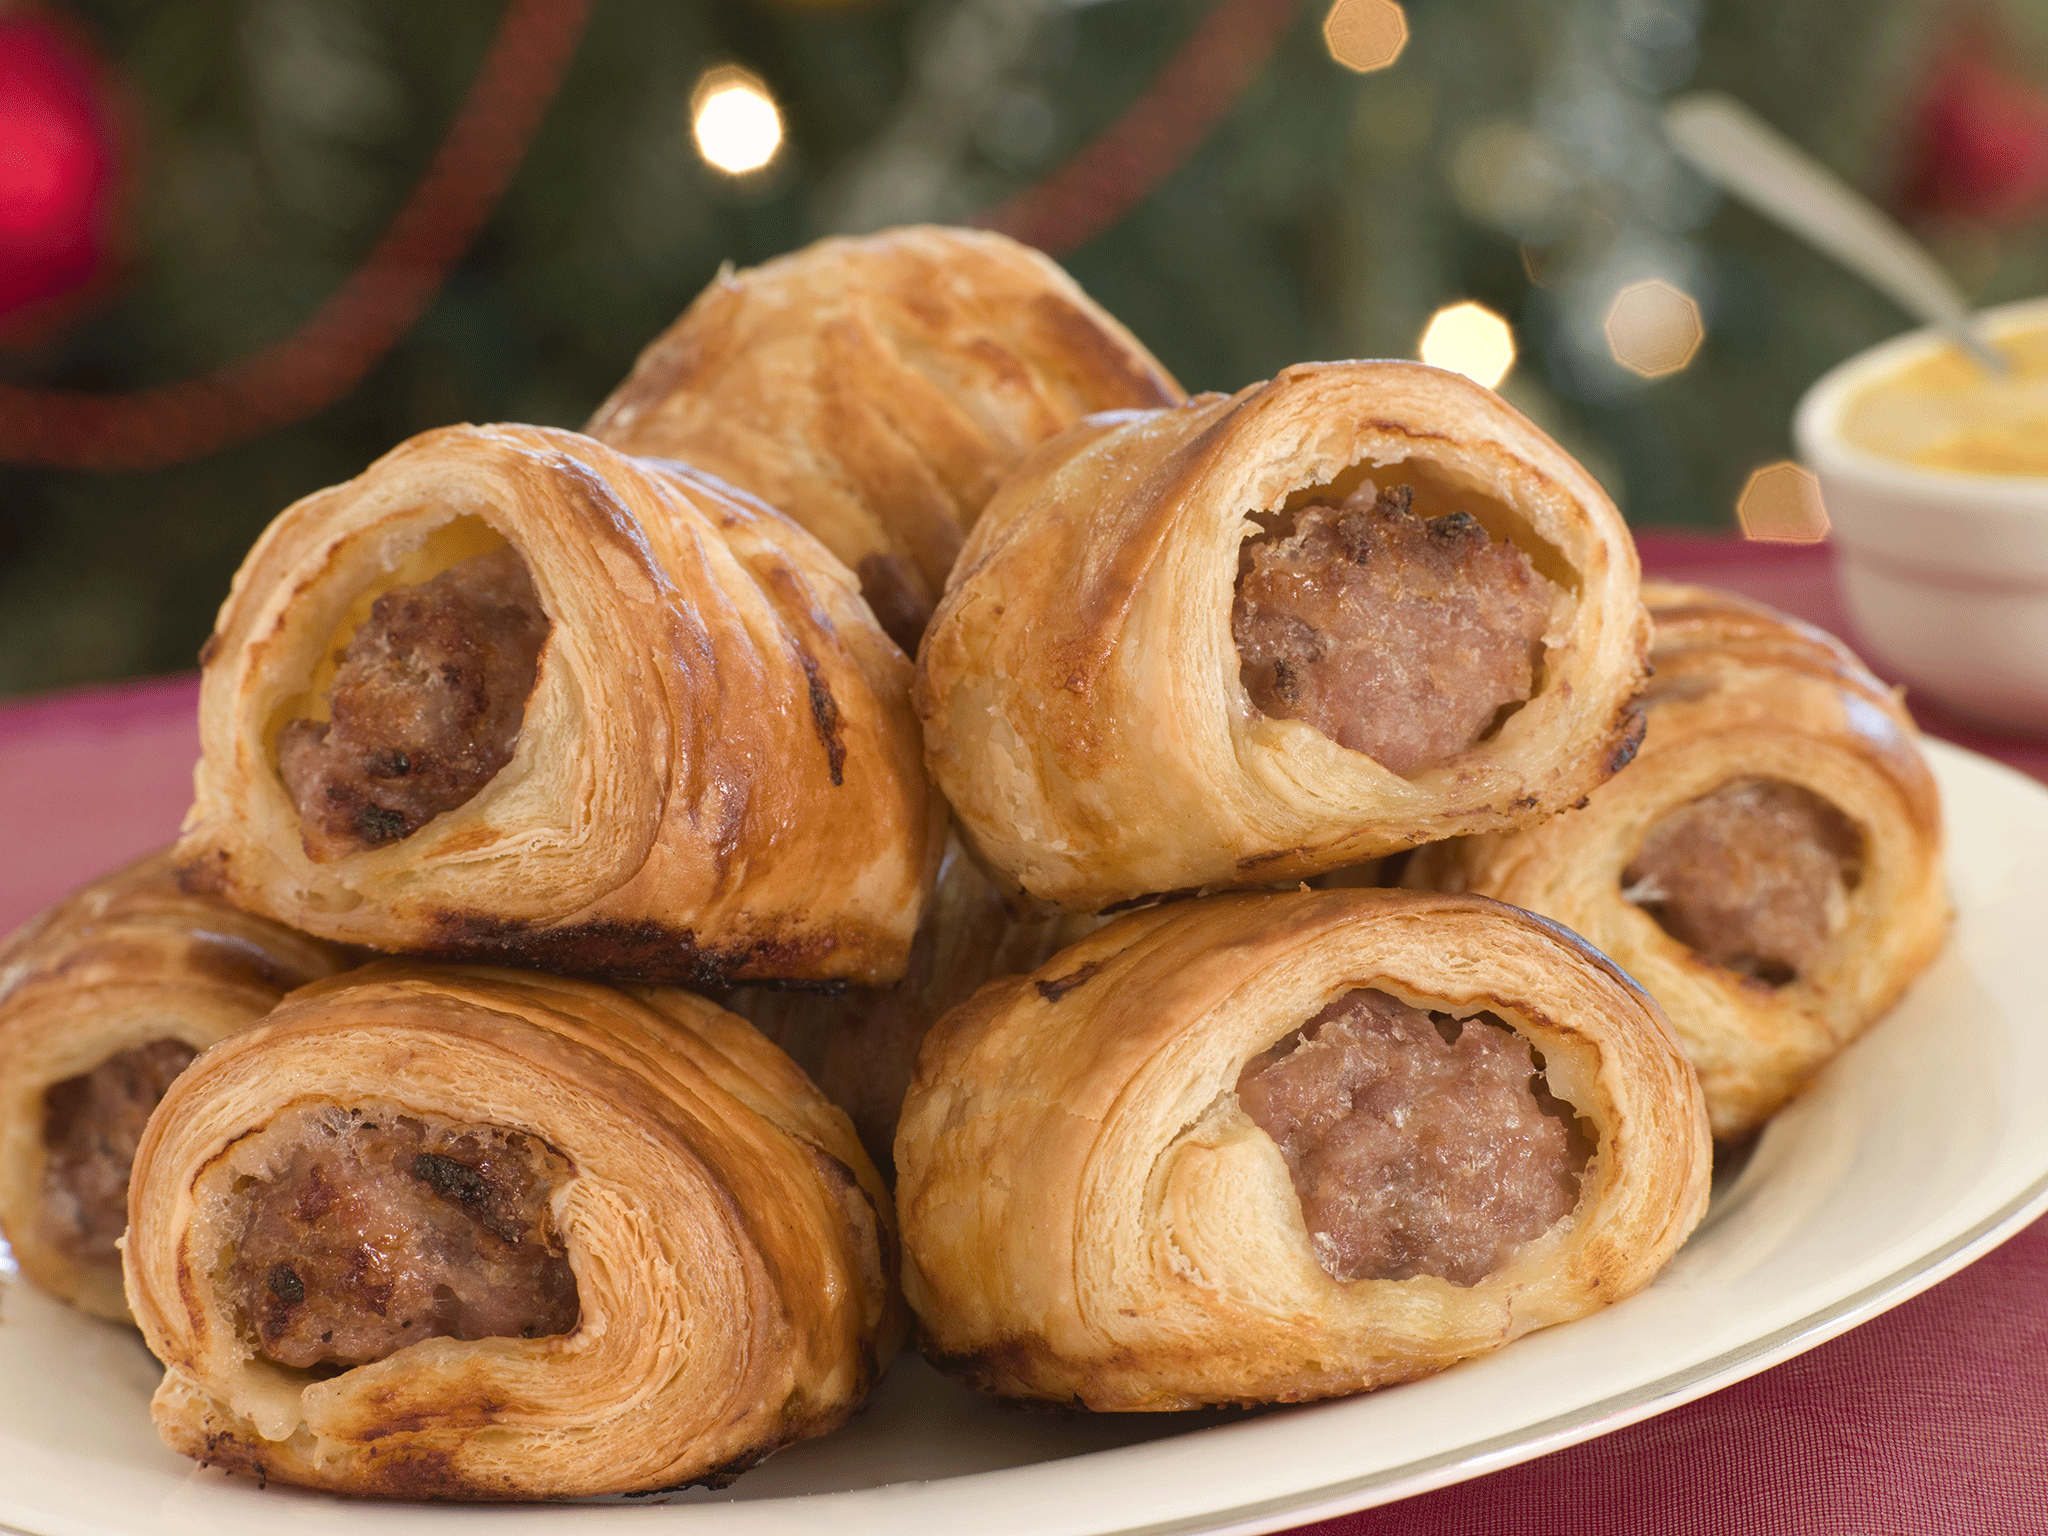 A New York Times article drew attention to the history of the sausage roll in British history